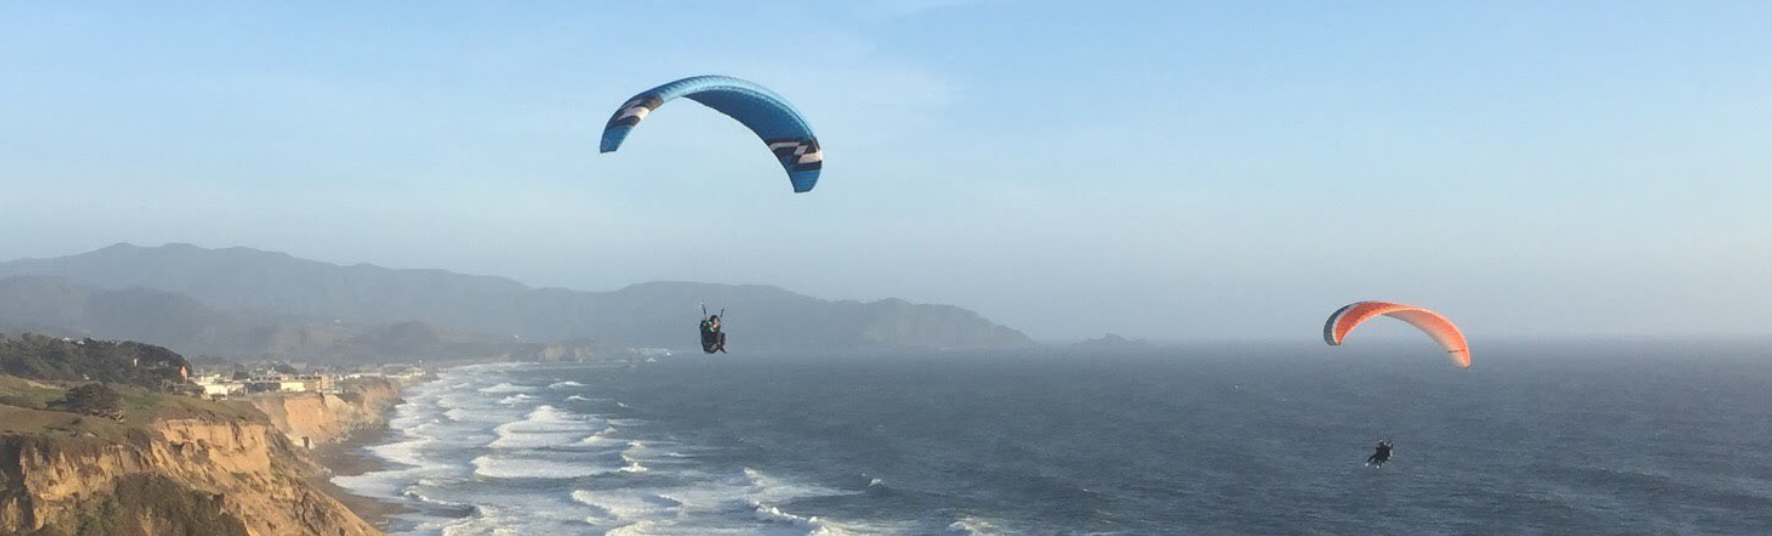 The author (left) flying at Cheetah Ridge (“southside”), Mussel Rock, Daly City, CA